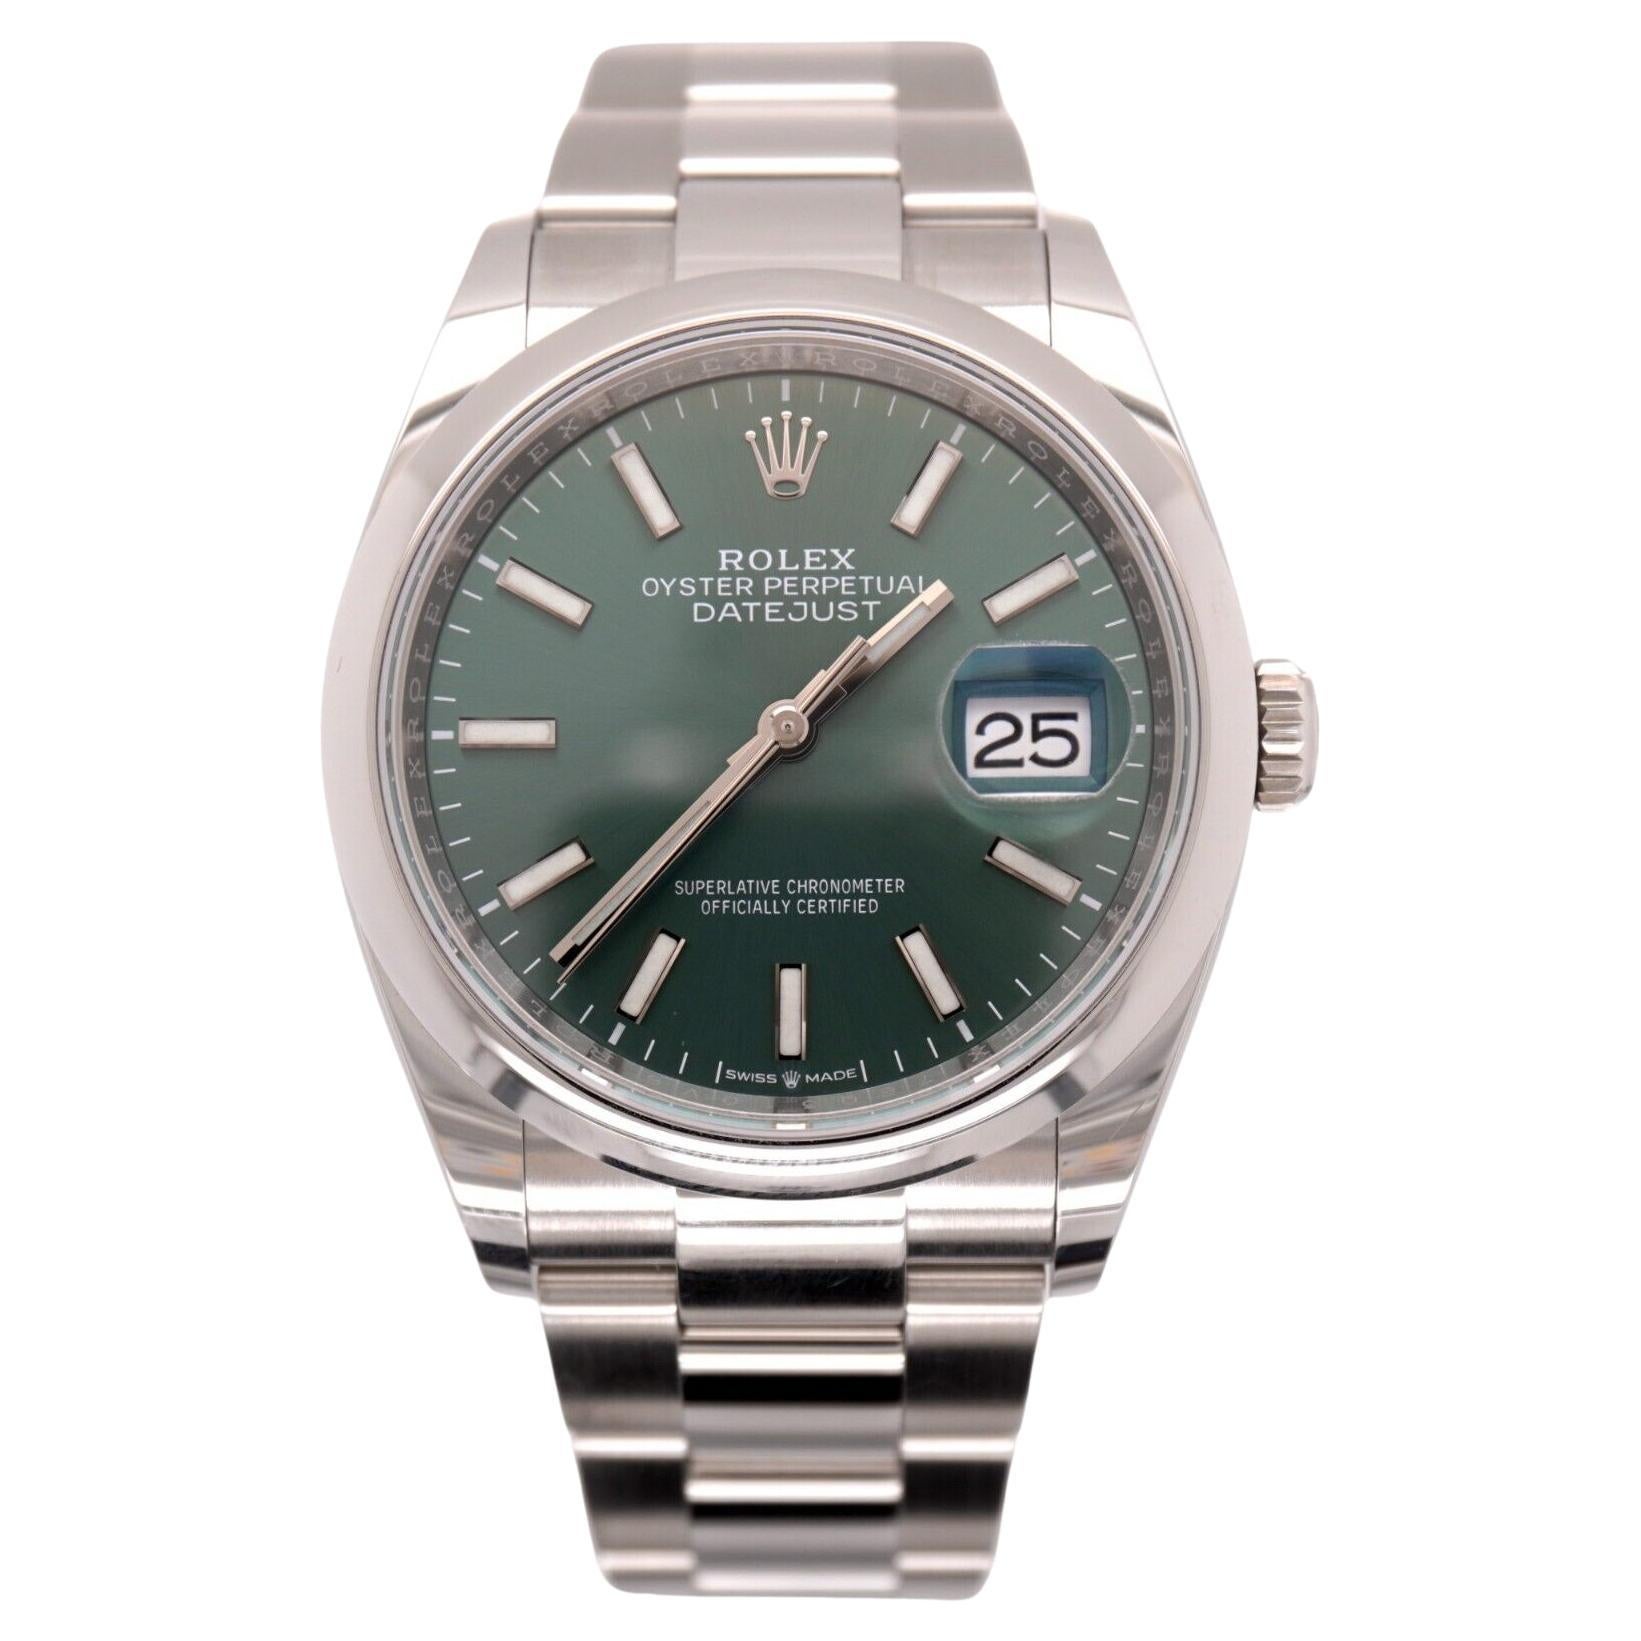 Rolex Datejust 36mm Stainless Steel Green Dial Smooth Oyster Watch Ref: 126200 For Sale